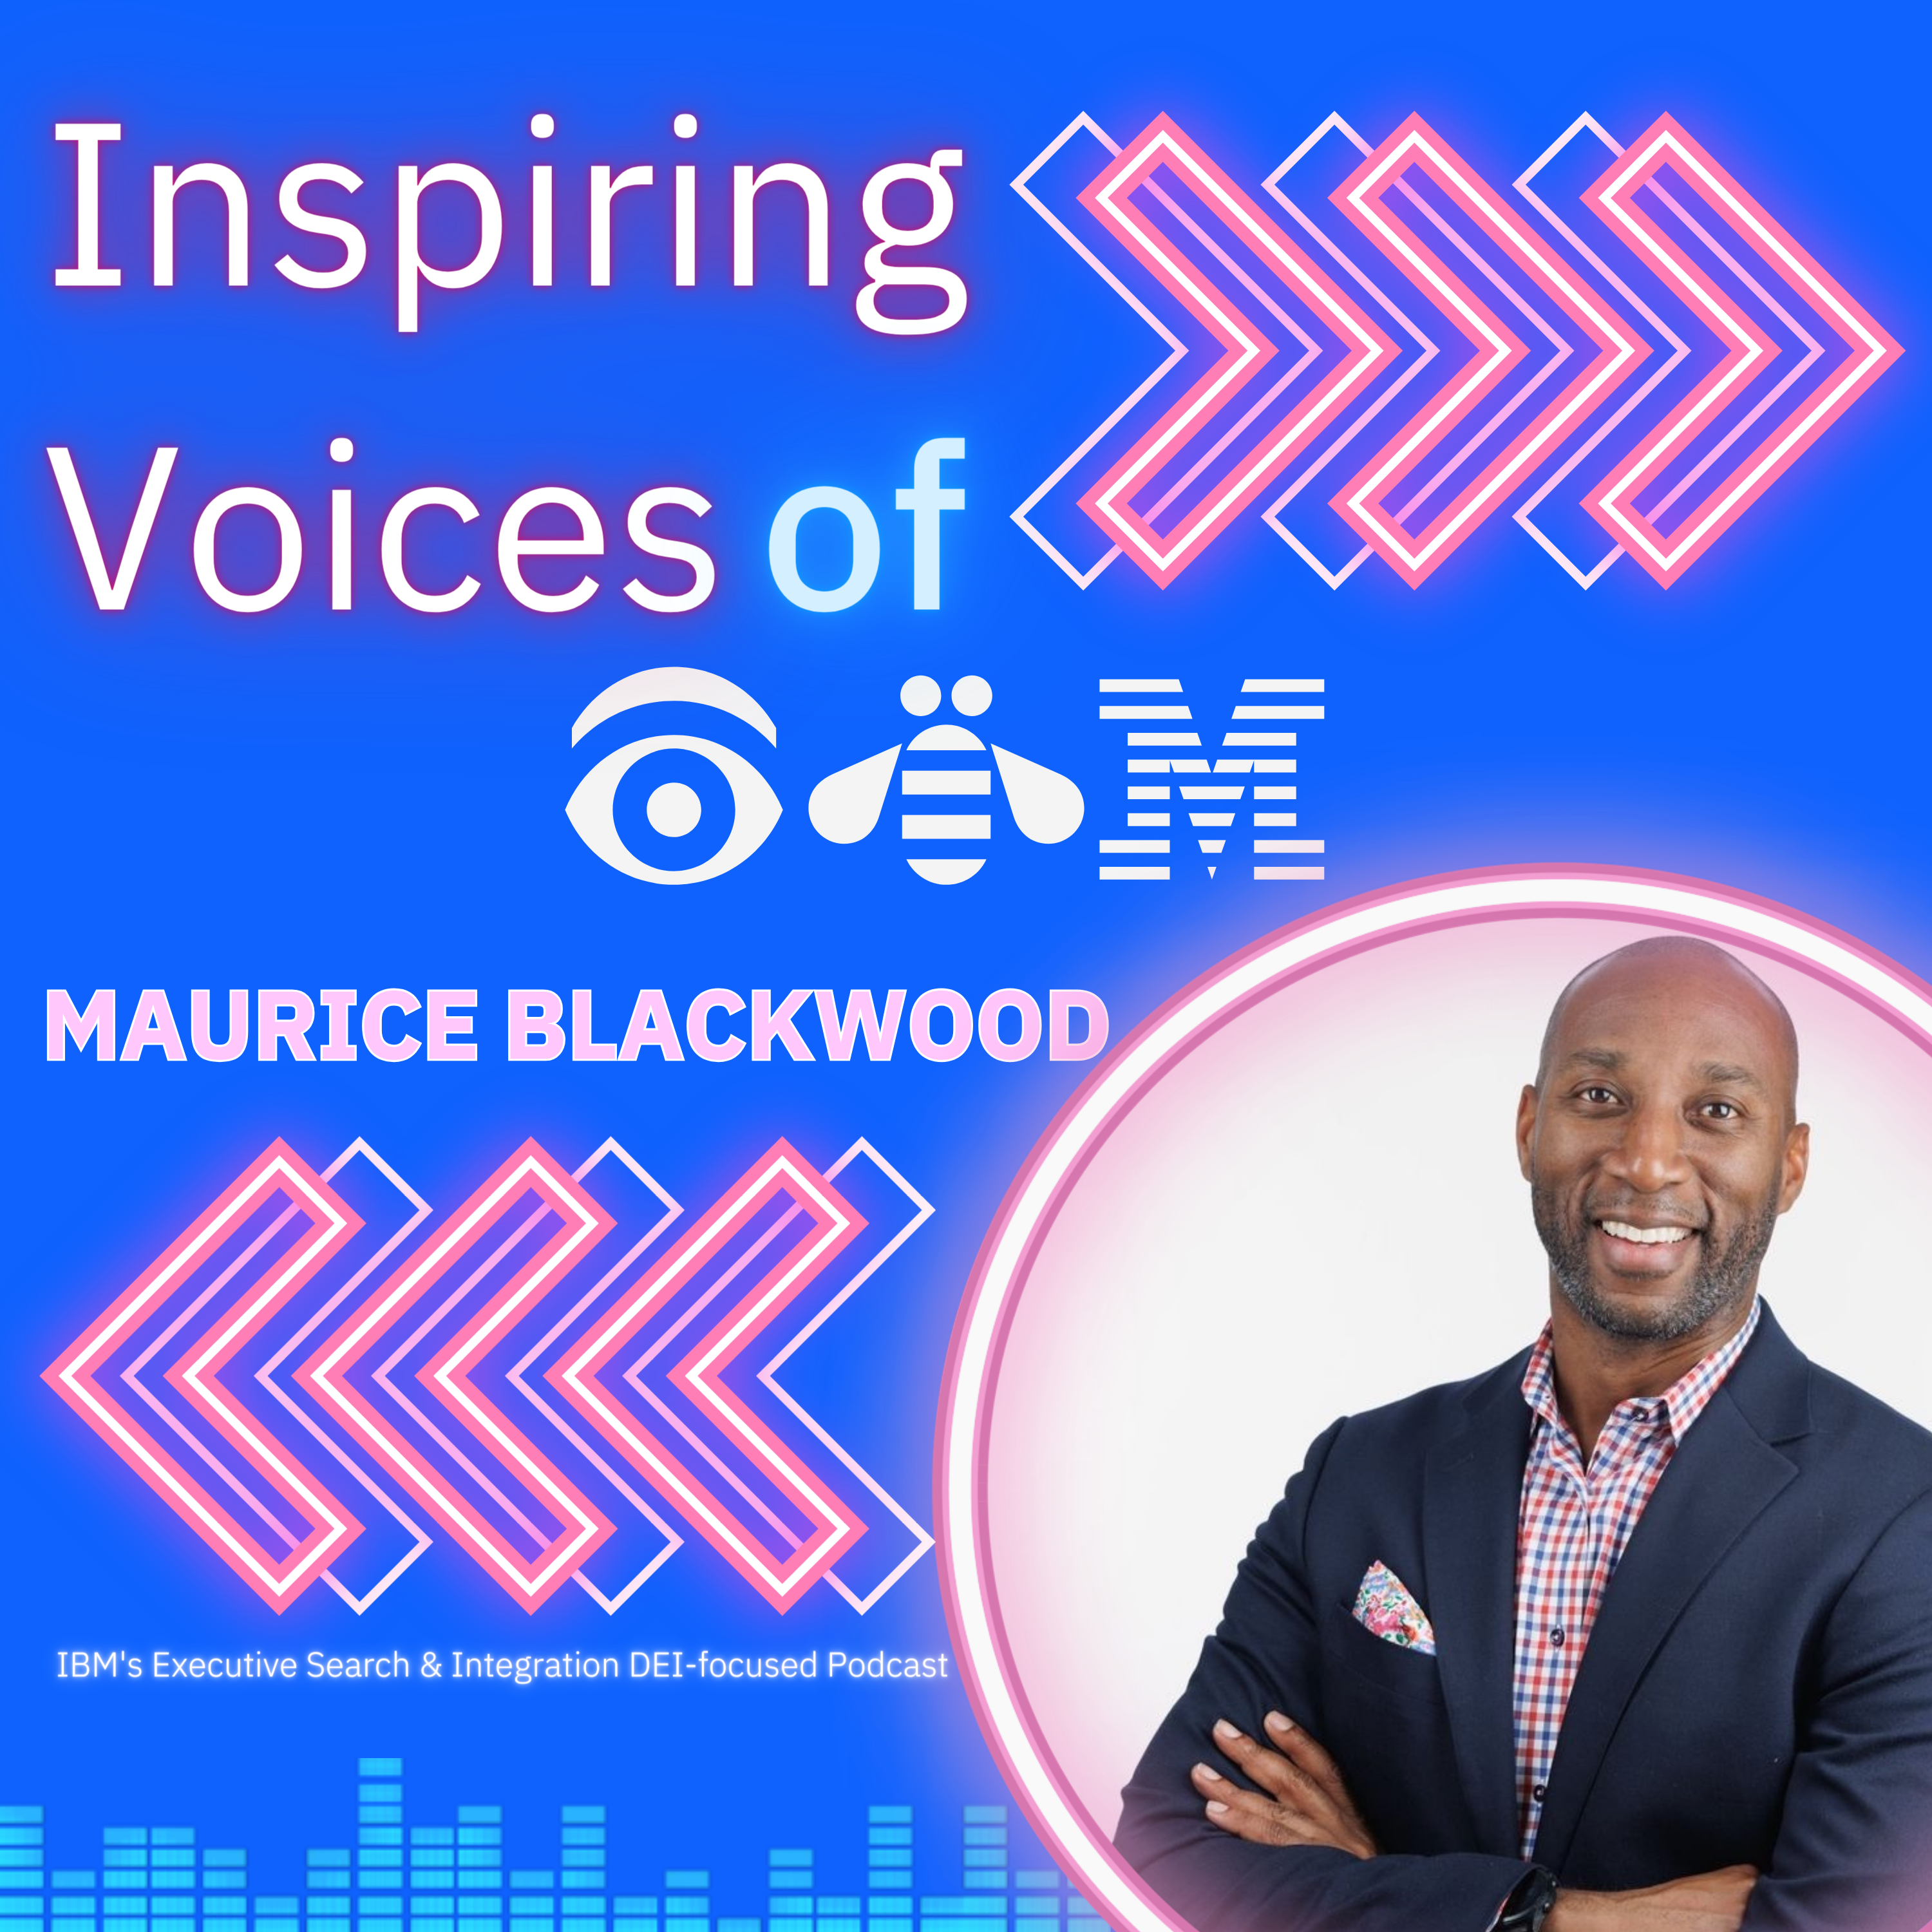 Inspiring Voices featuring Maurice Blackwood